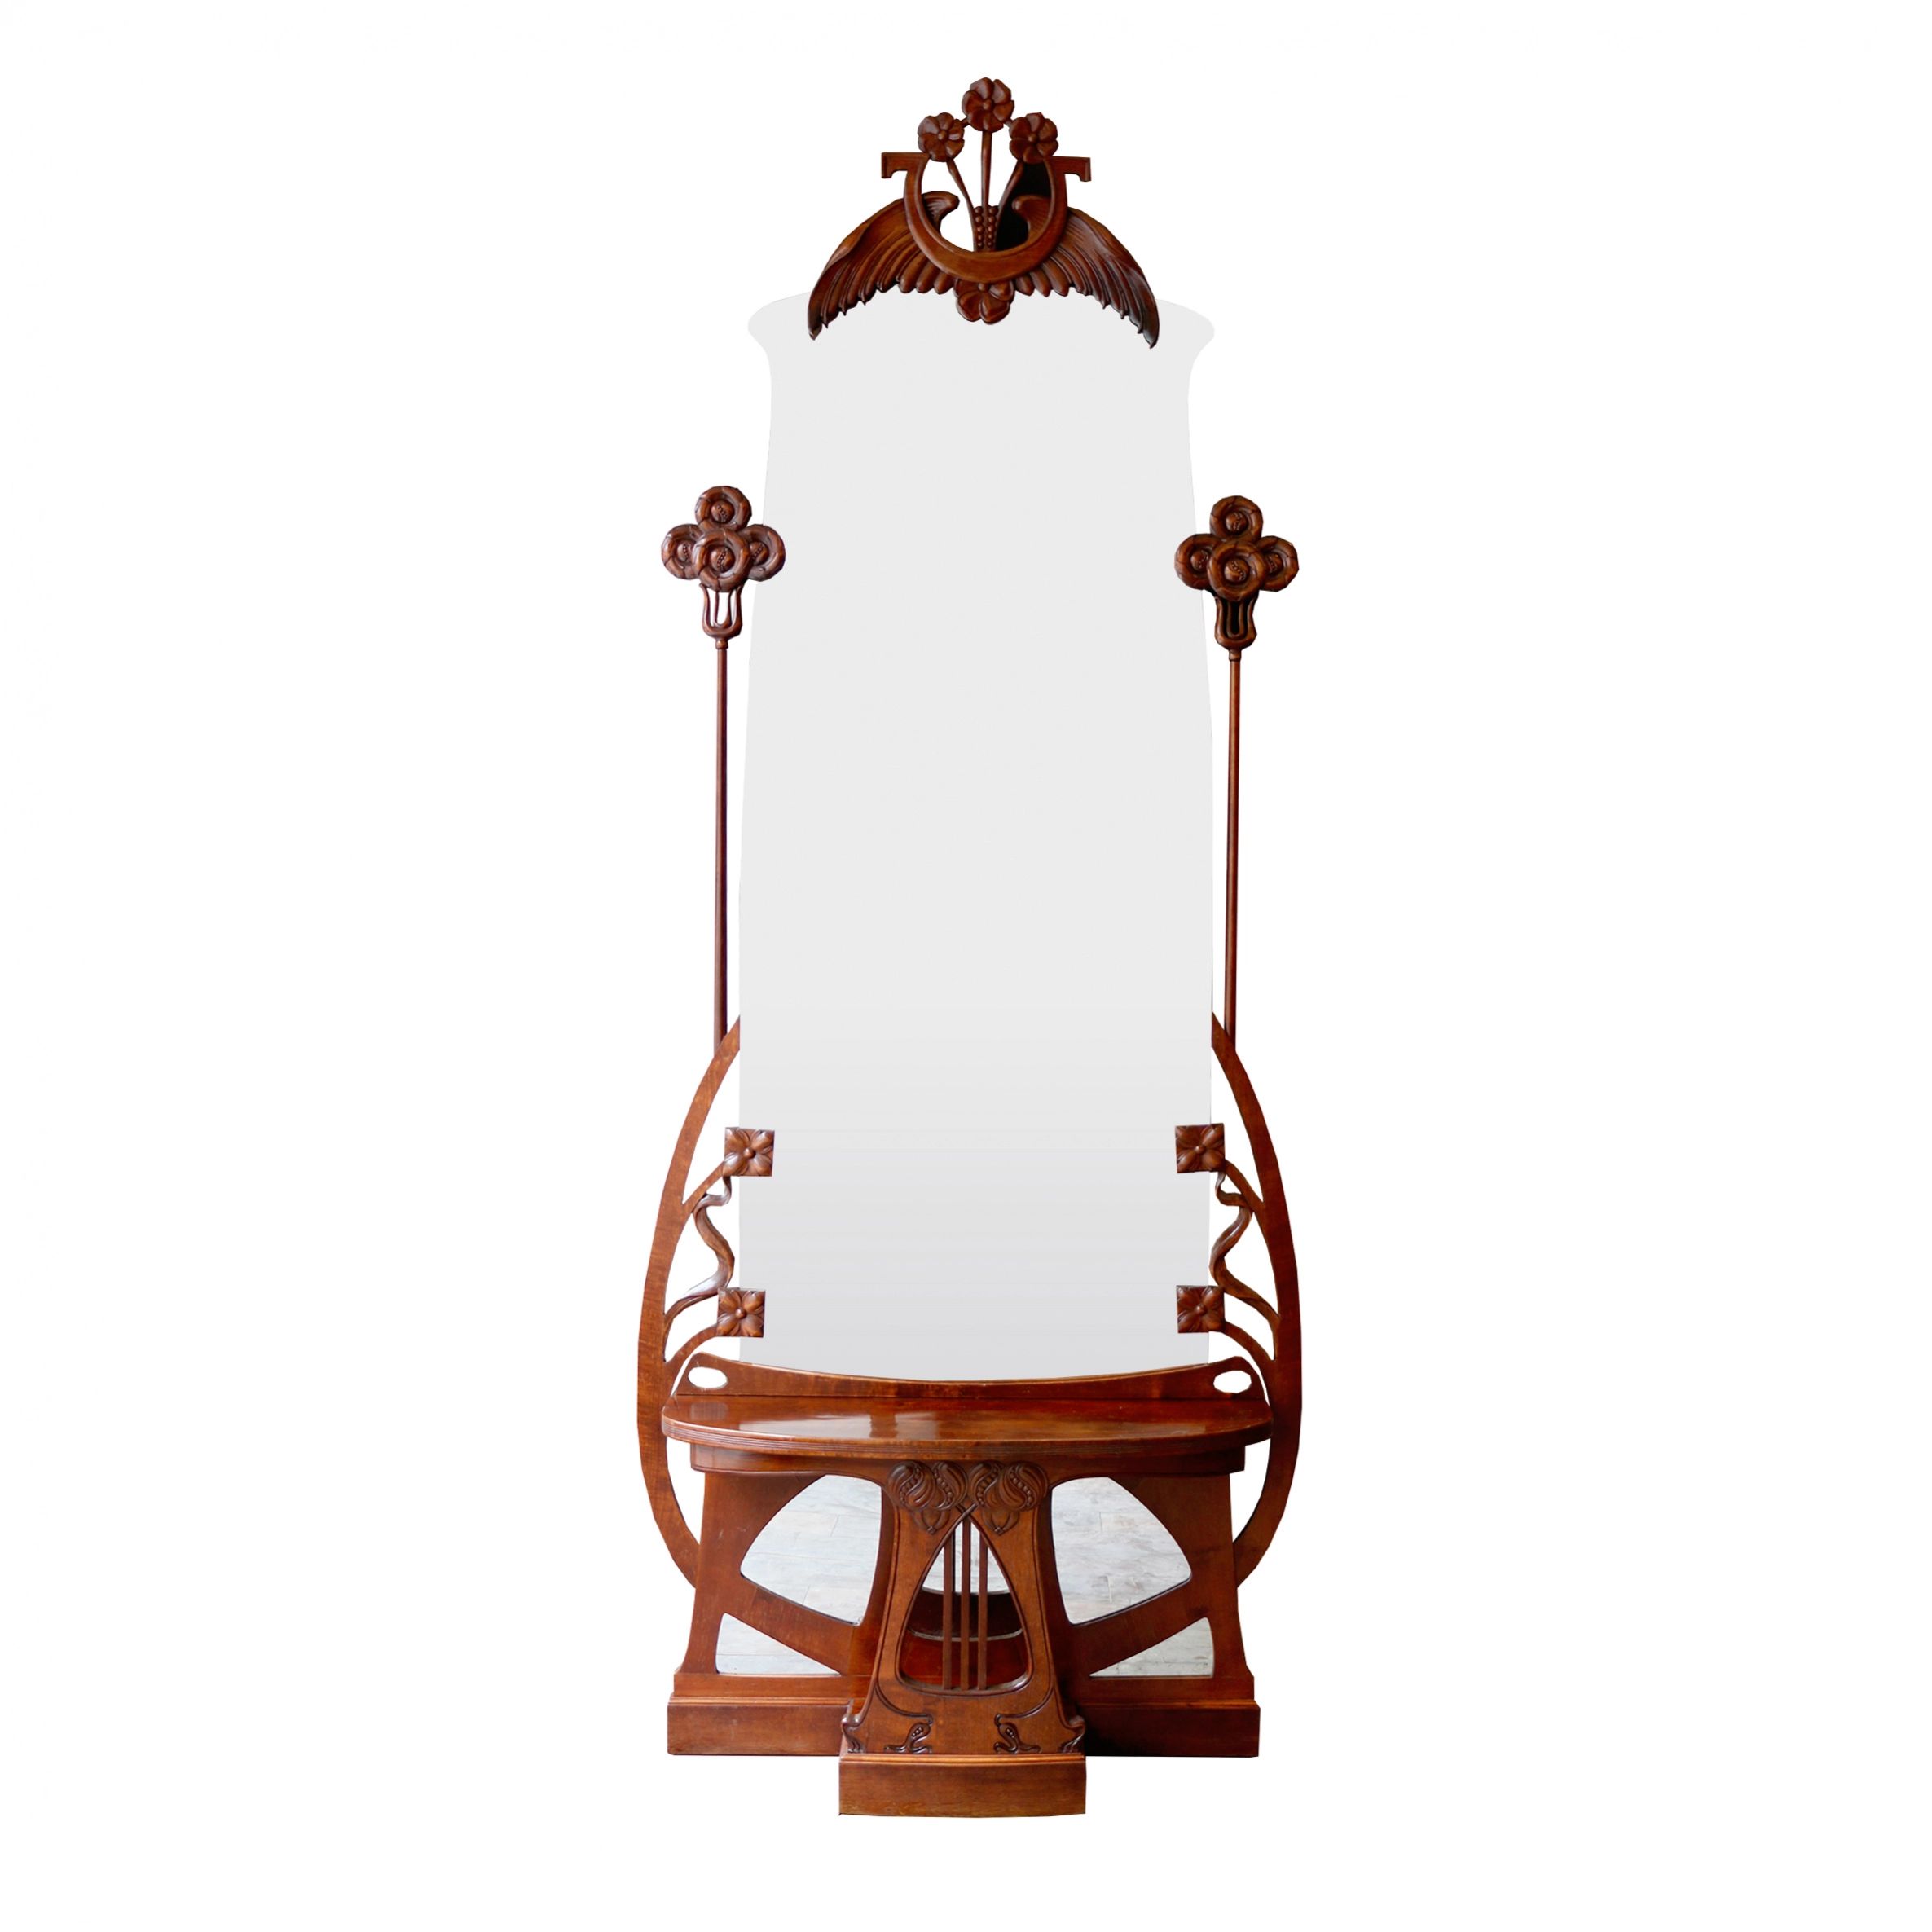 Floor-mirror-with-a-console-Jugendstil